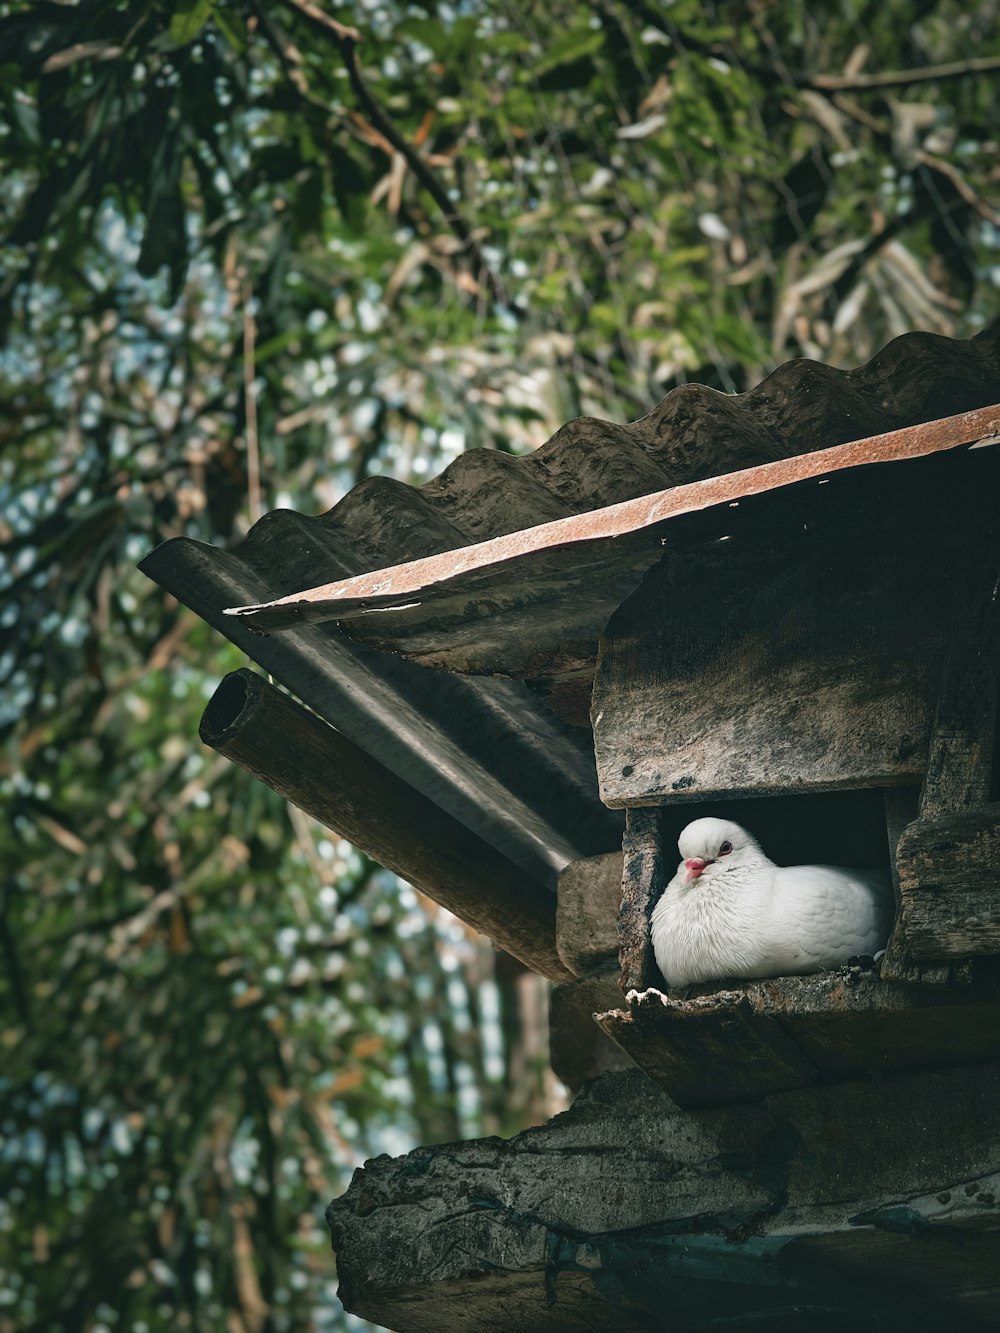 a white bird is sitting in a birdhouse